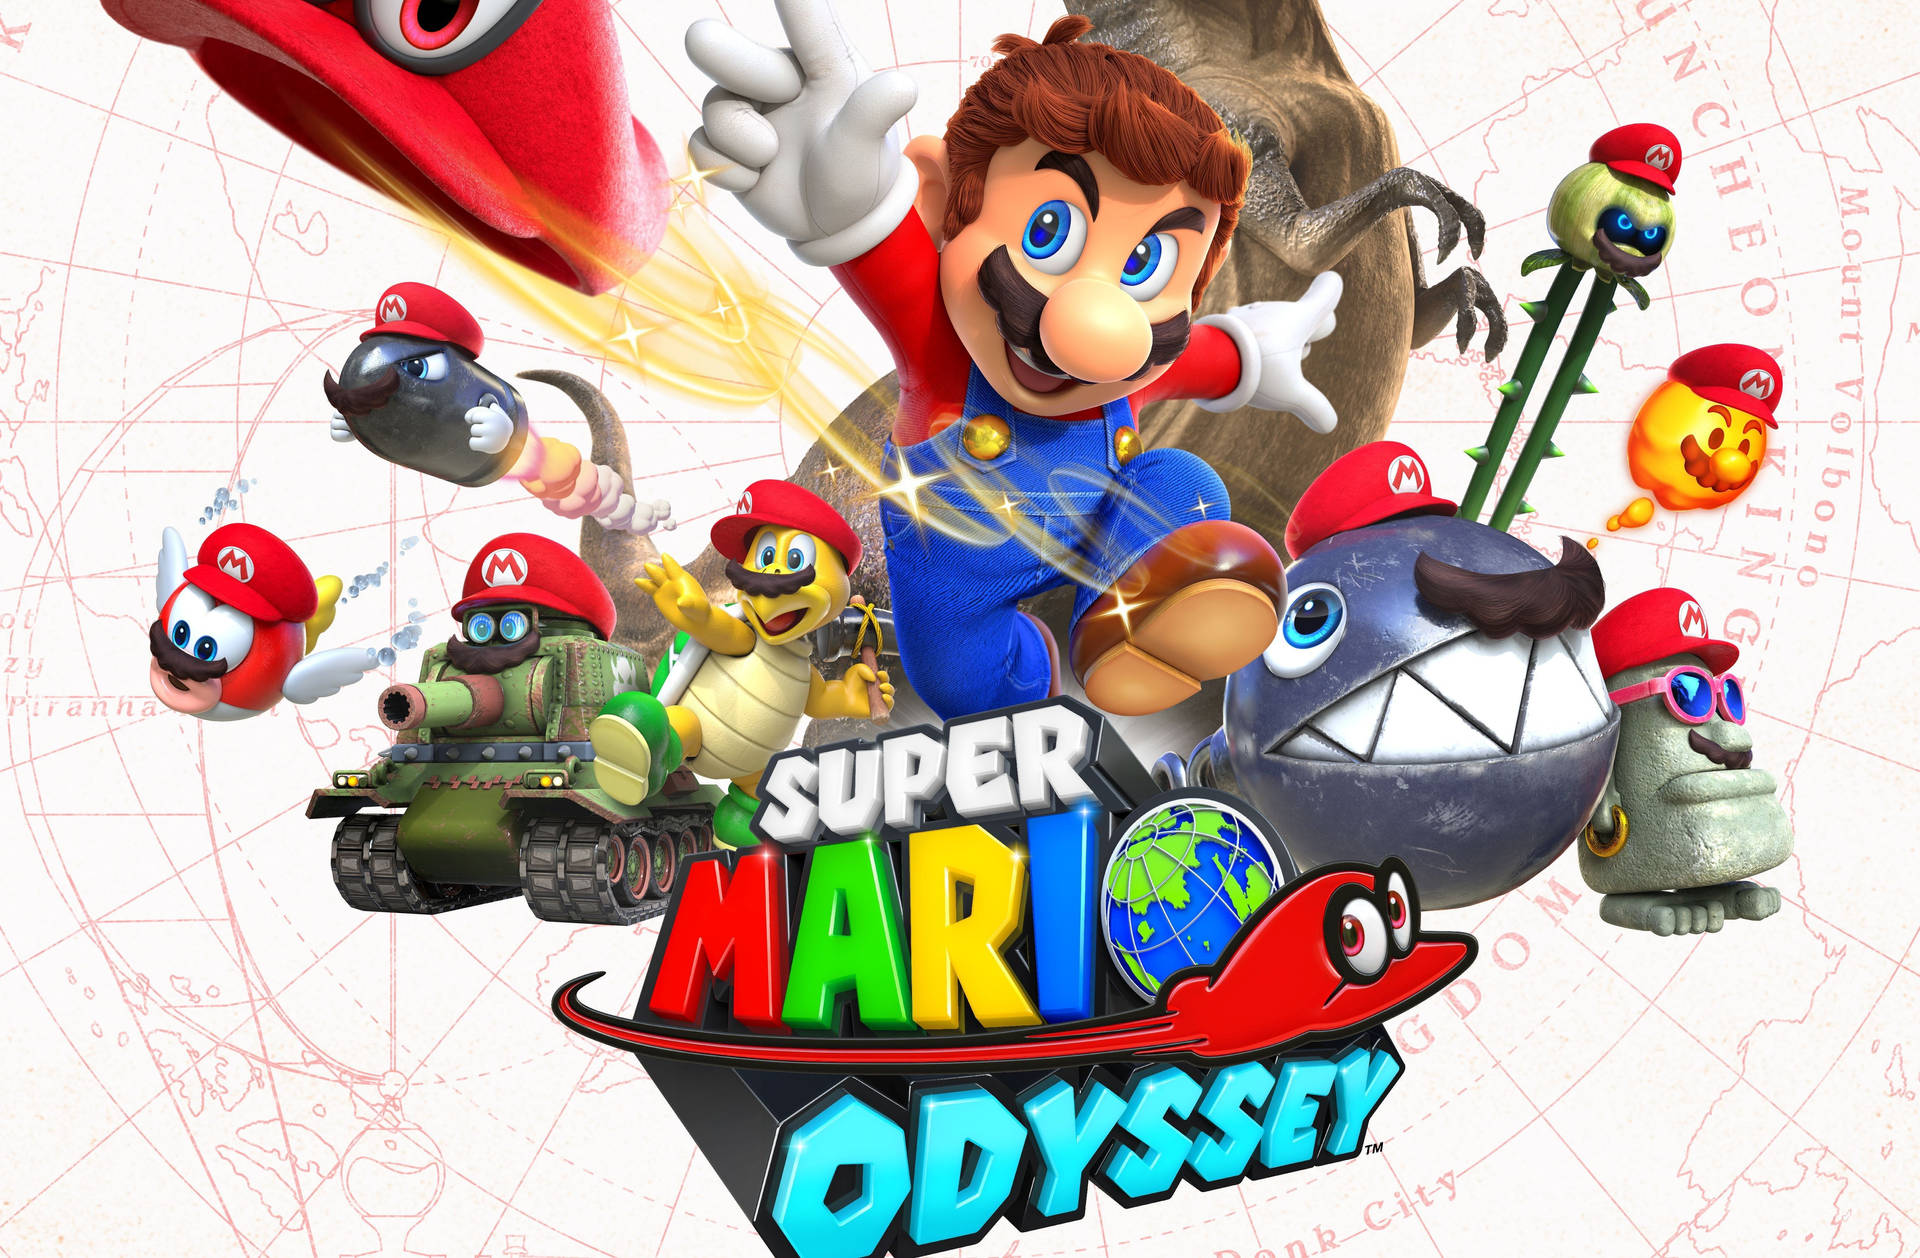 Supper Mario Odyssey Game Poster Wallpaper